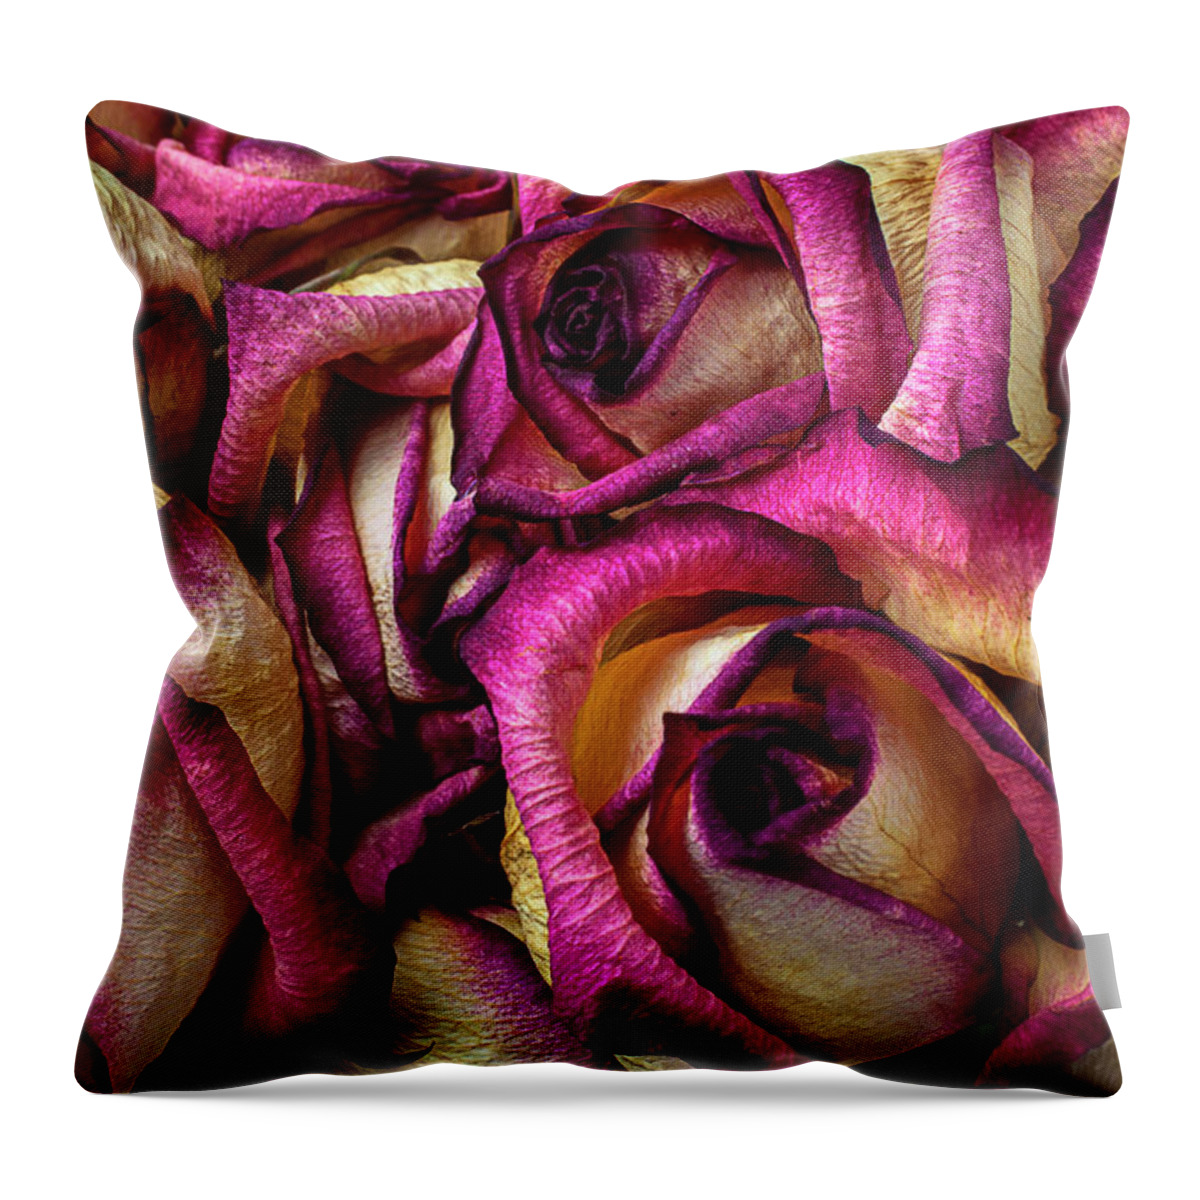 Purple Throw Pillow featuring the photograph Dried Pink And White Roses #1 by Garry Gay